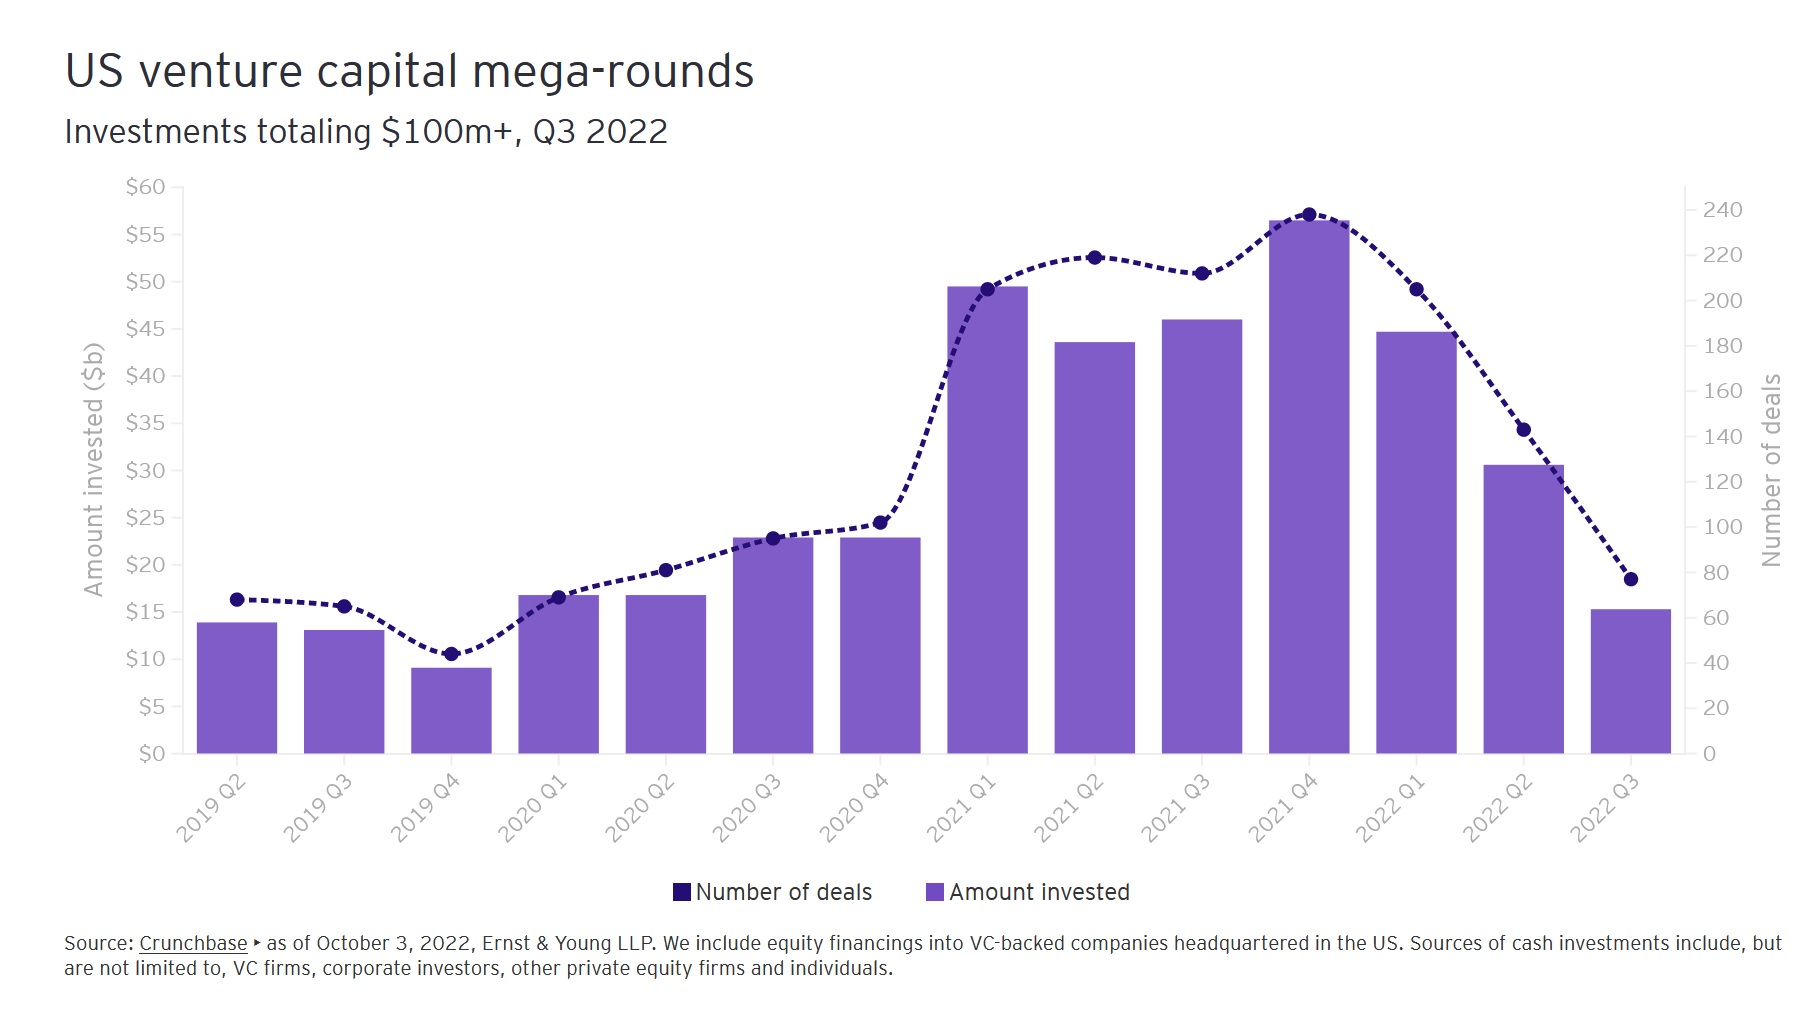 large rounds of venture capital financings are declining rapidly